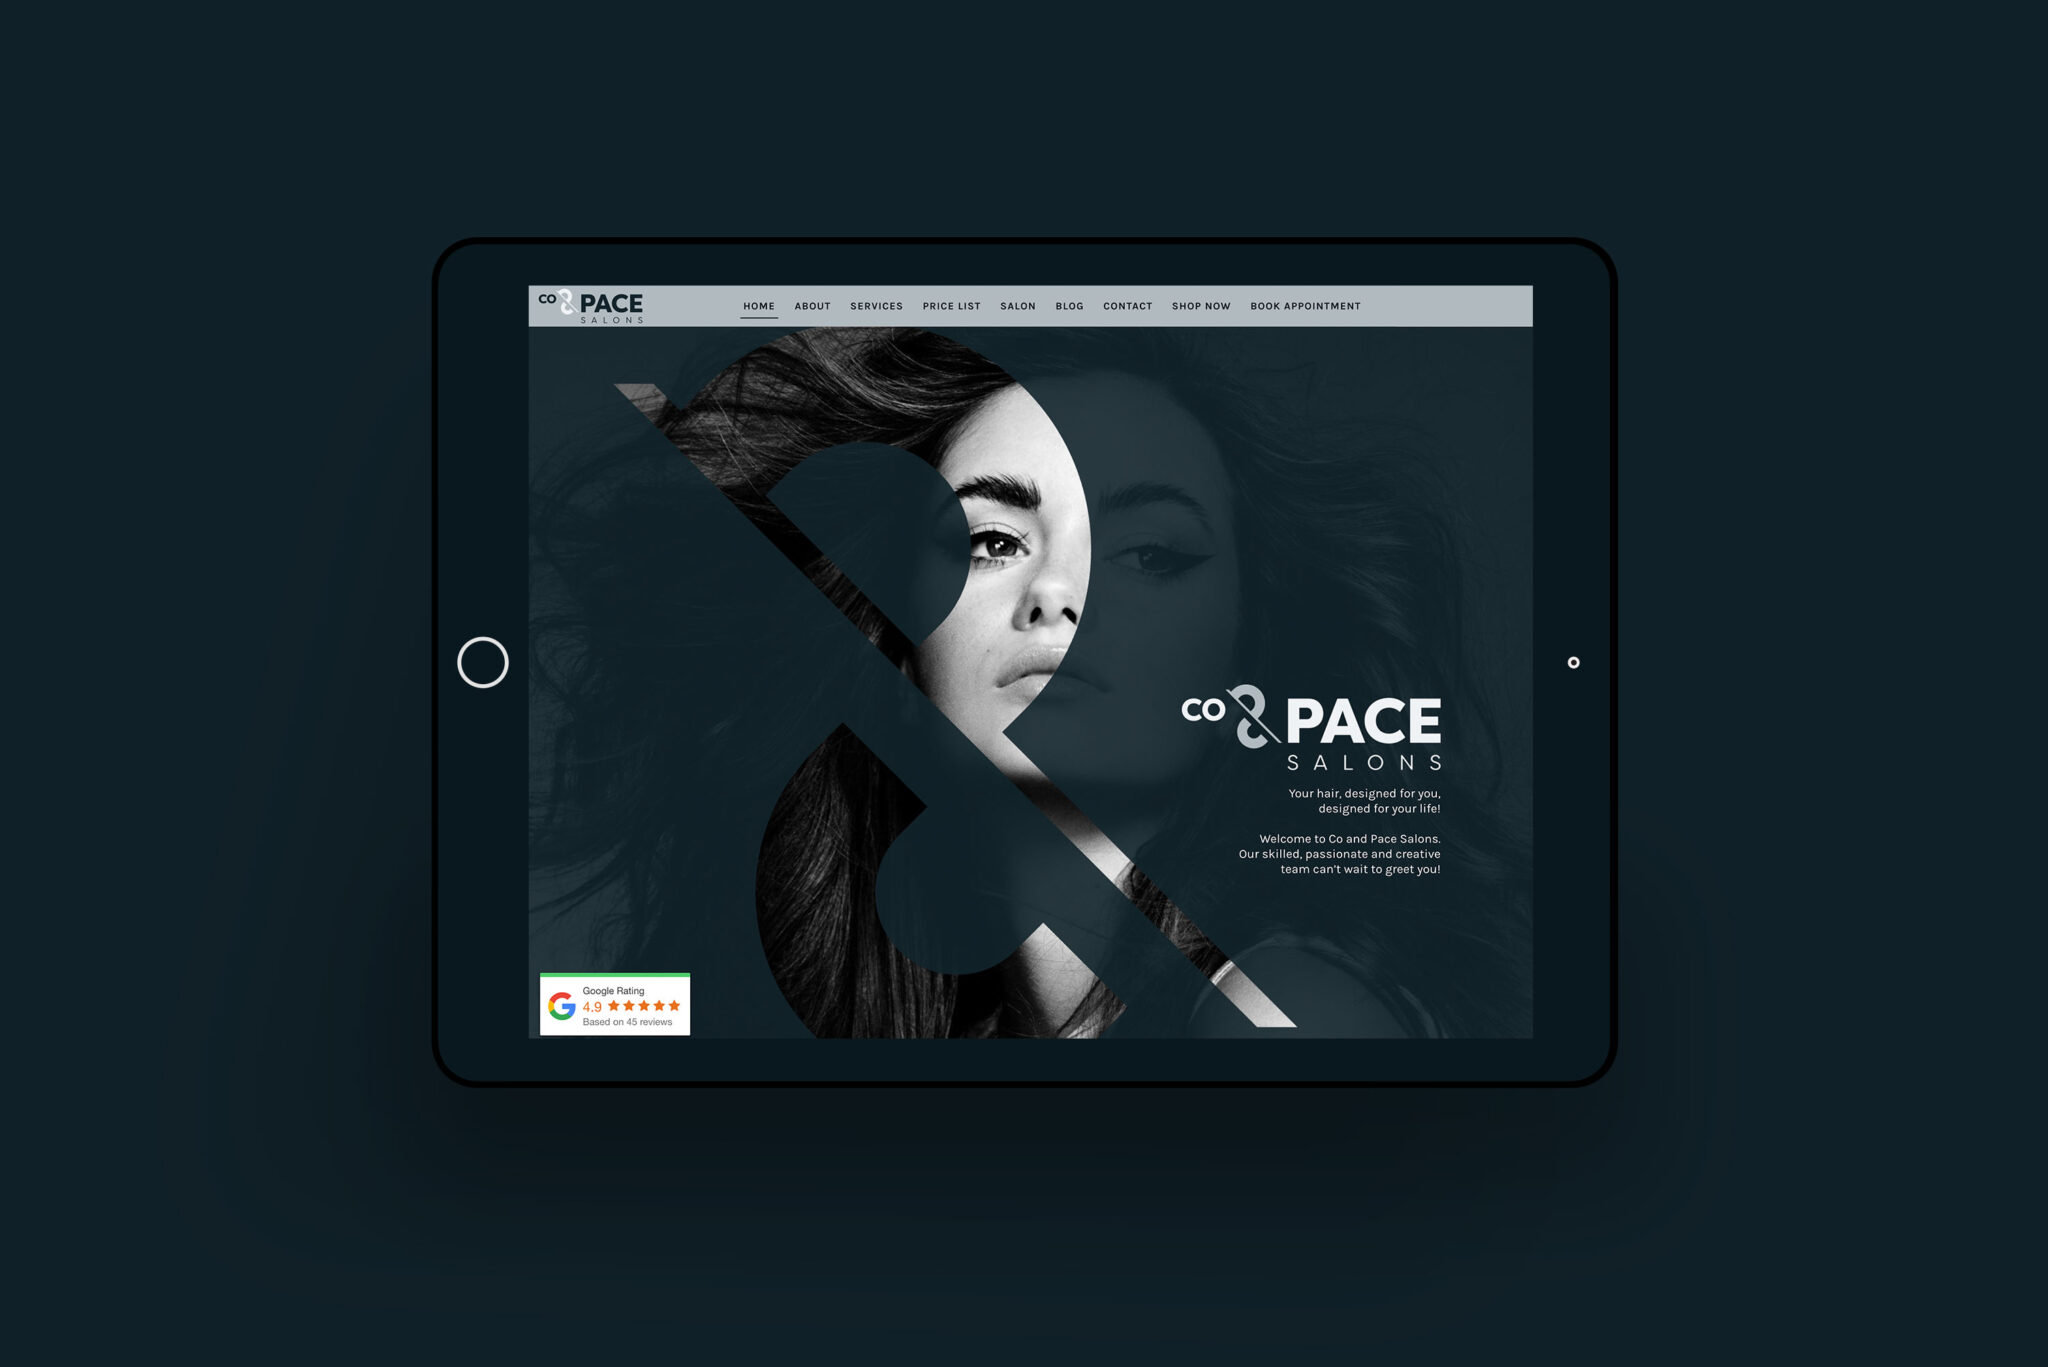 co and pace salons website design